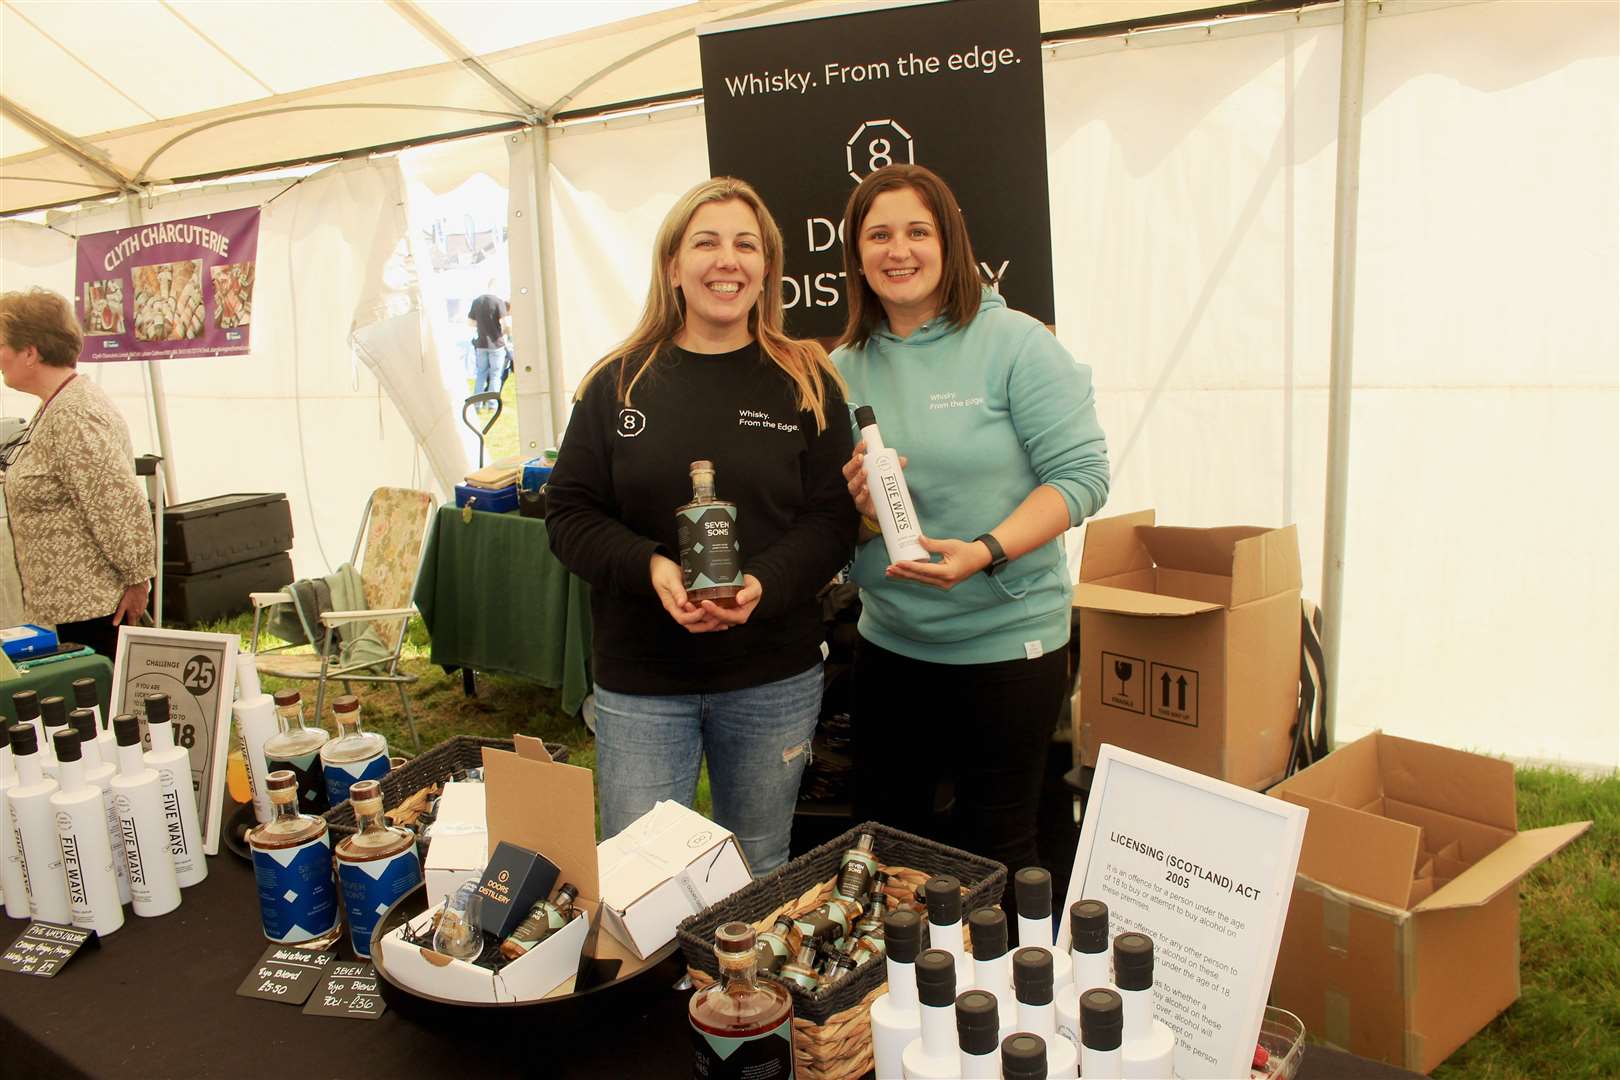 Kerry Campbell and Laura MacDonald at the 8 Doors Distillery stand in the Northern Quality Produce marquee. Picture: Alan Hendry